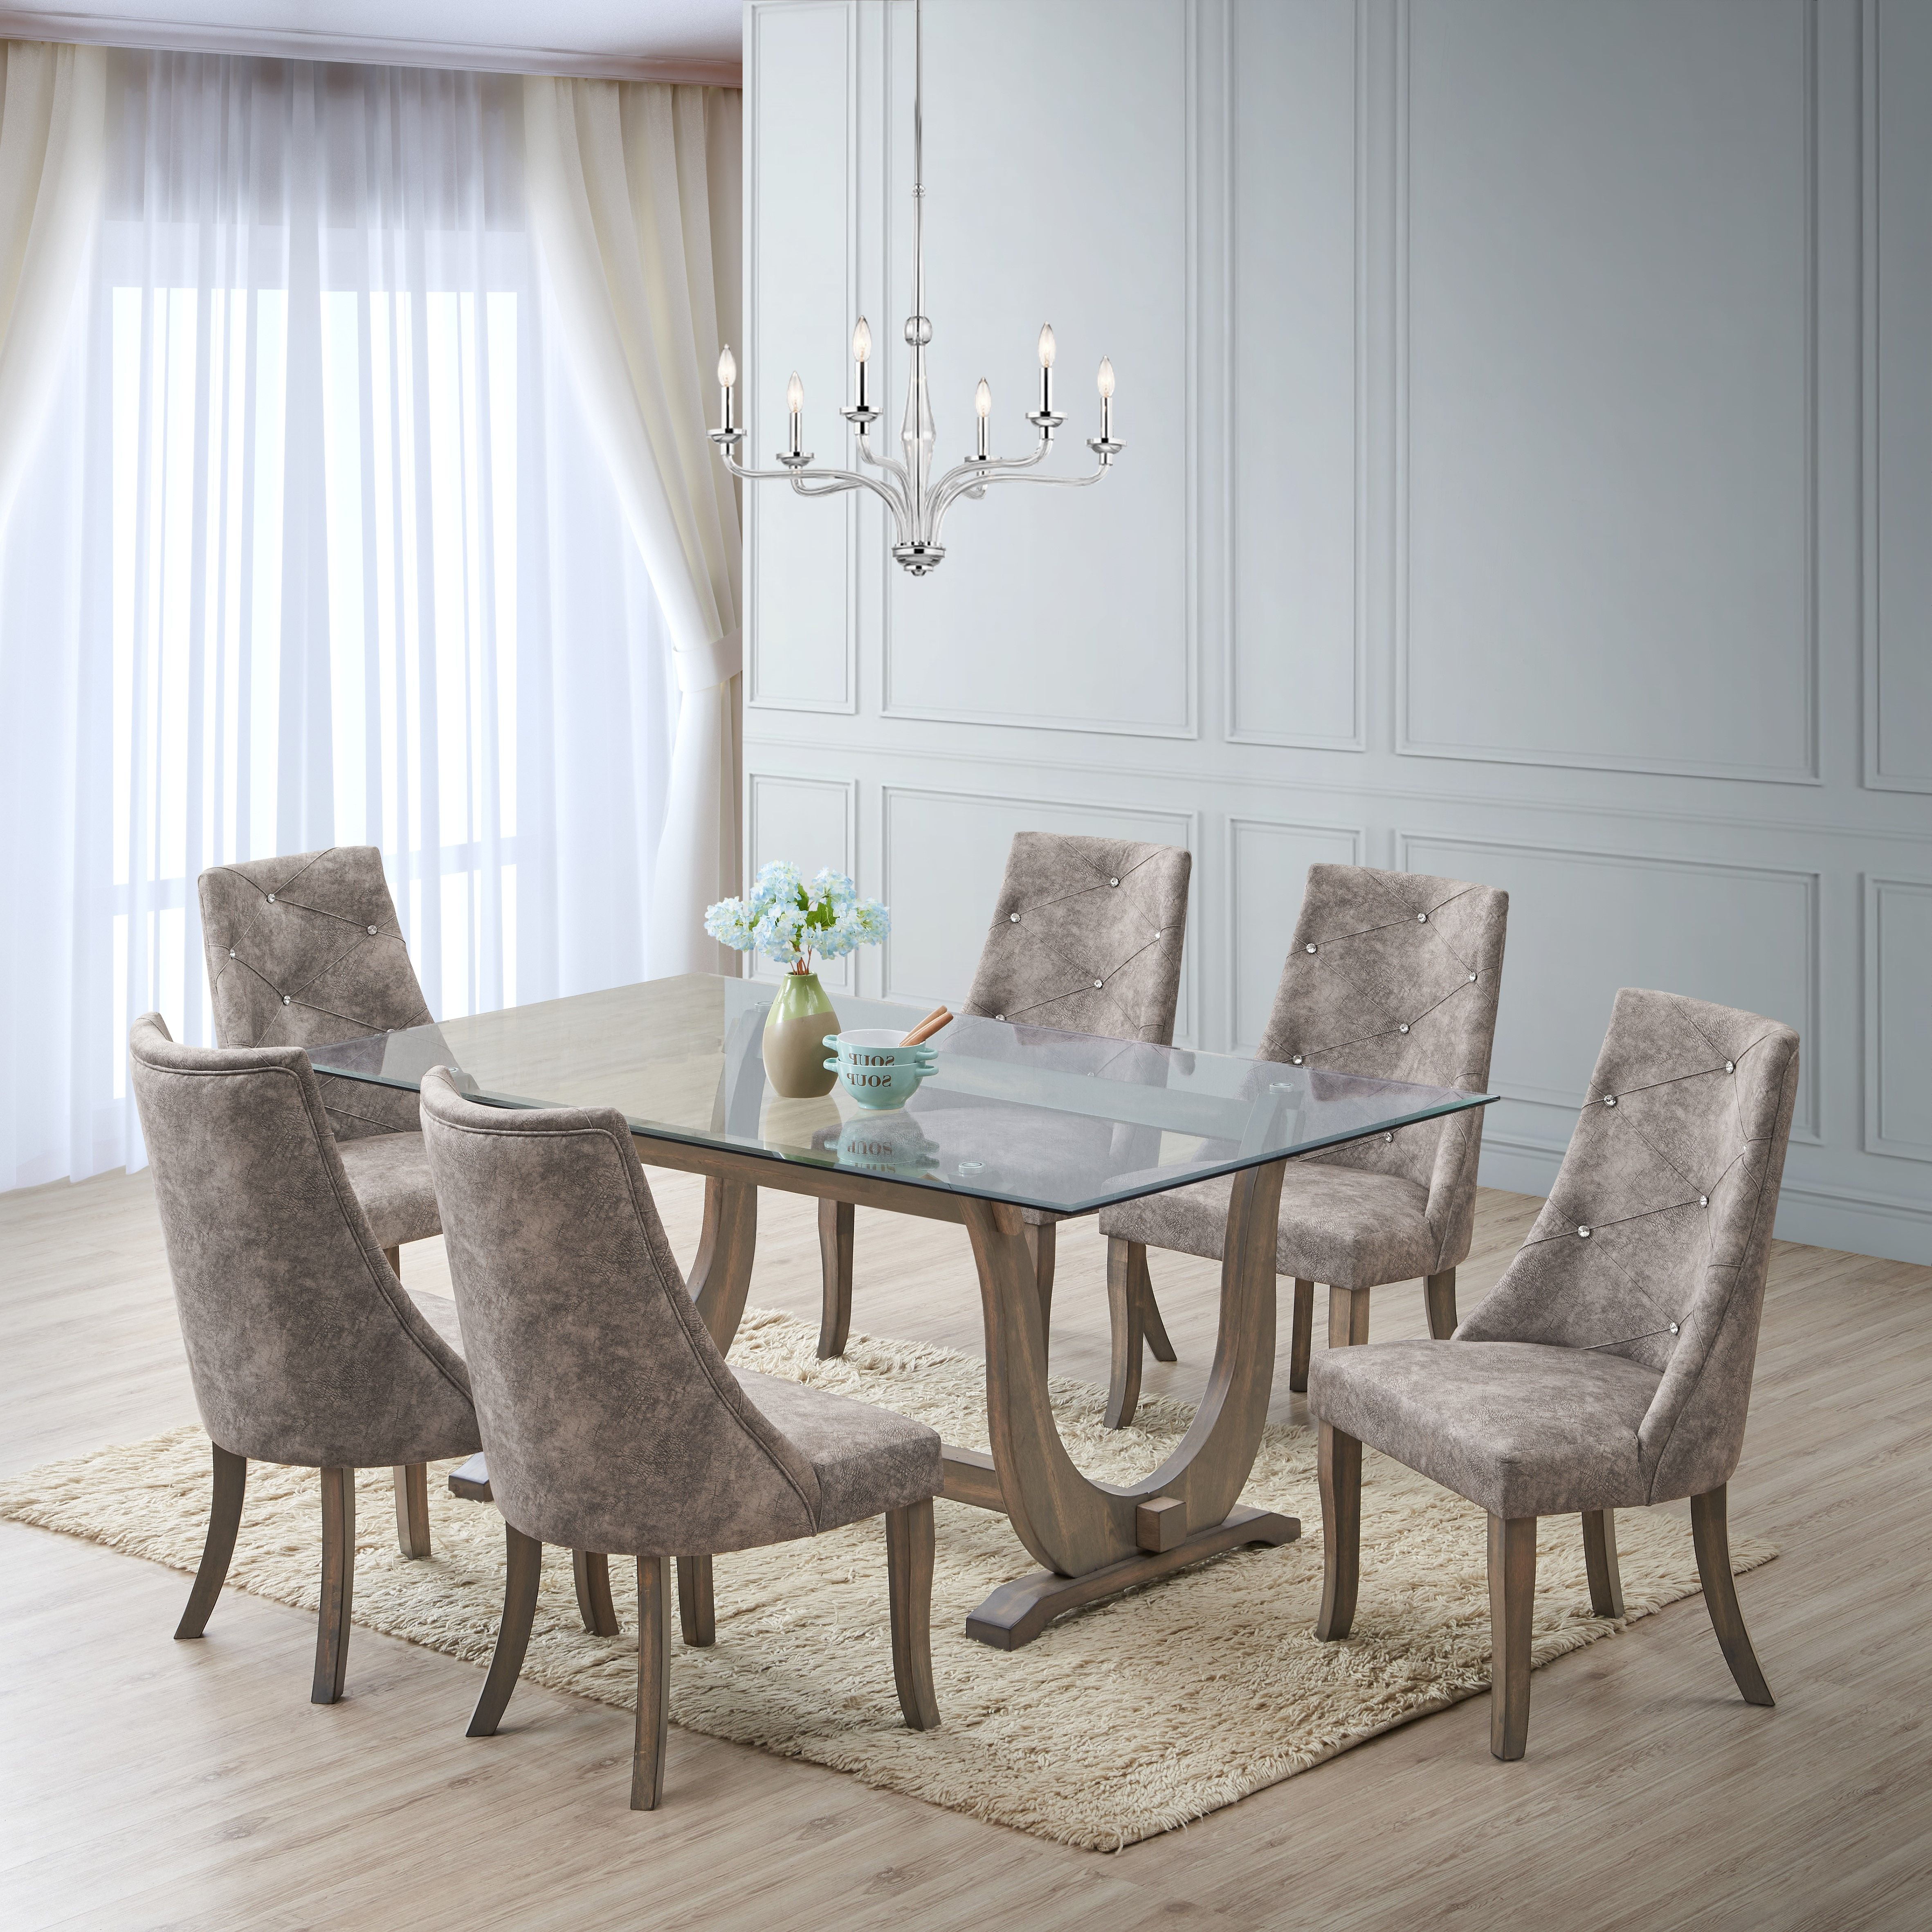 Benoit 7 Piece Glass Dining Set Gray, Gray Dining Room Table Set For 6